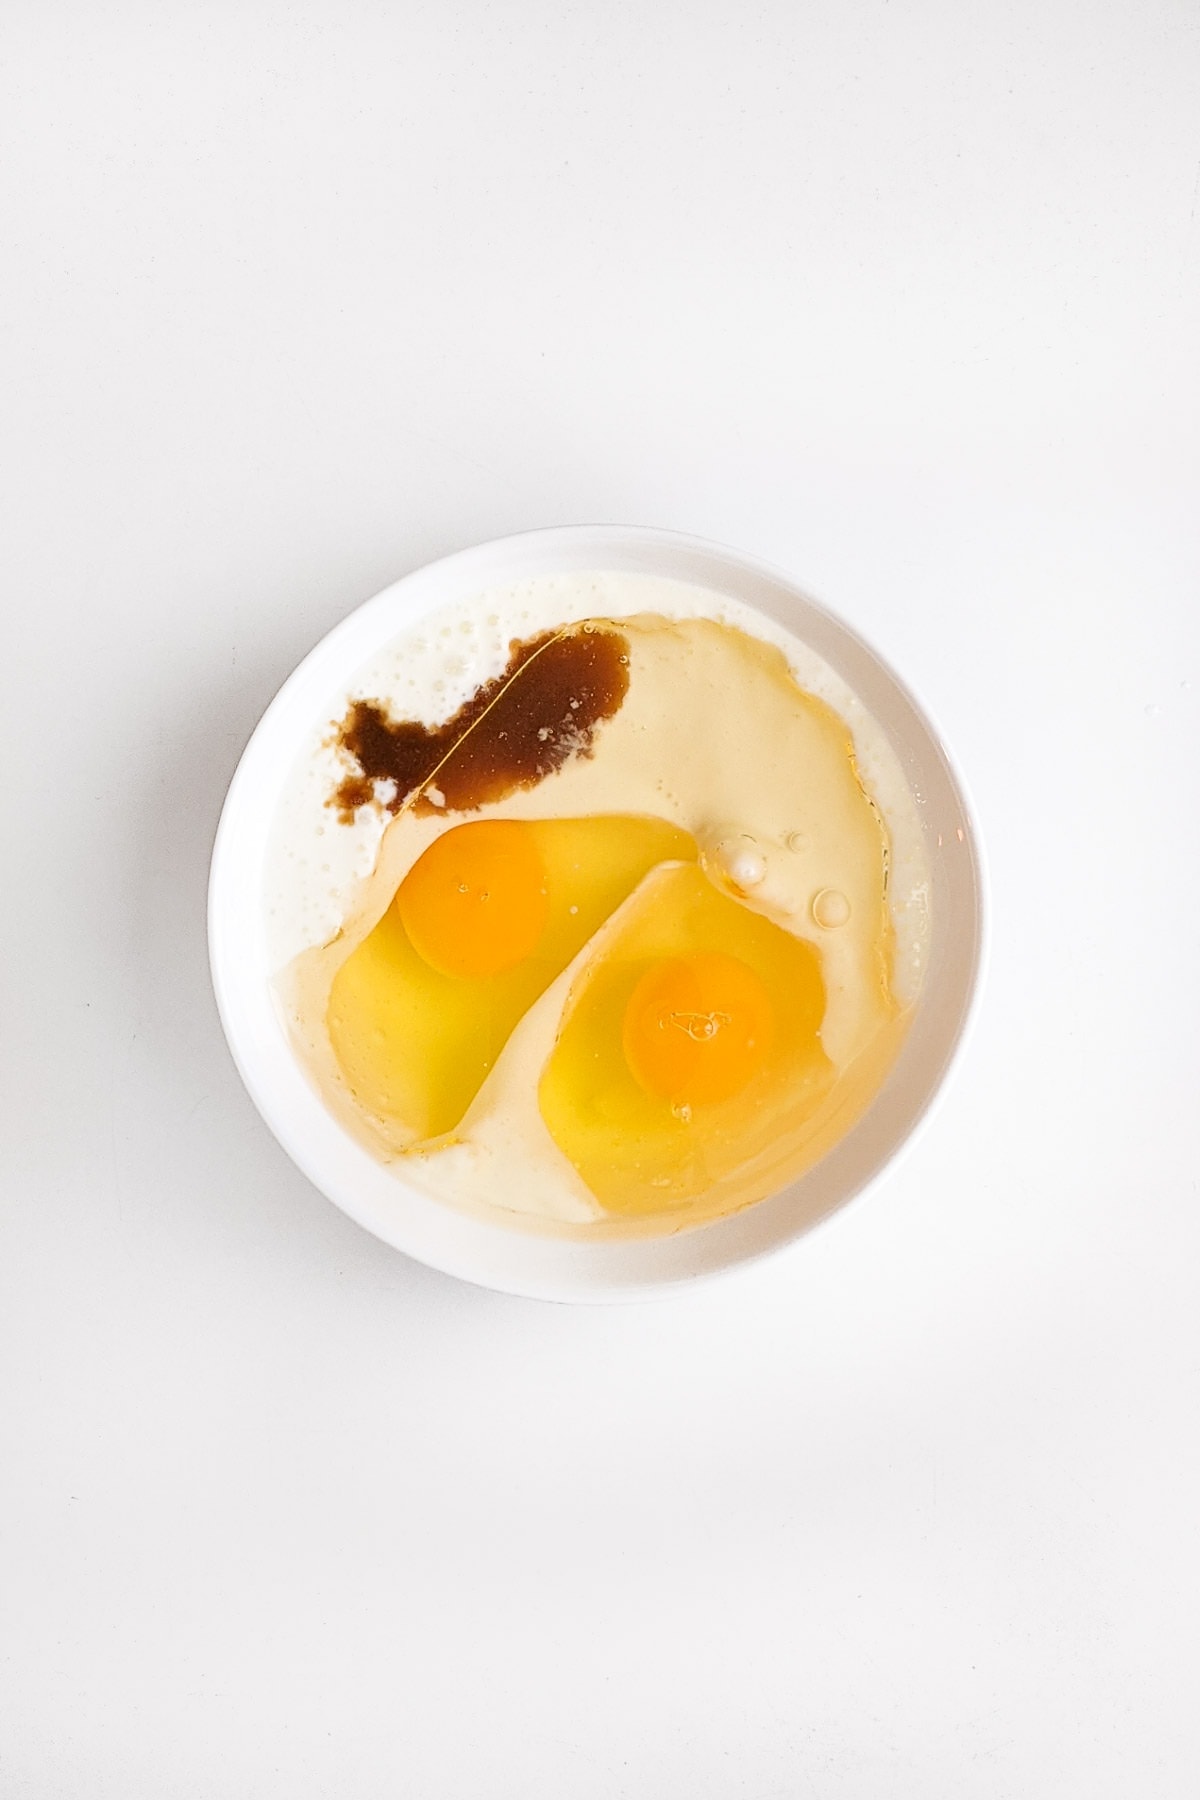 A plate with two raw eggs, buttermilk and vanilla extract.